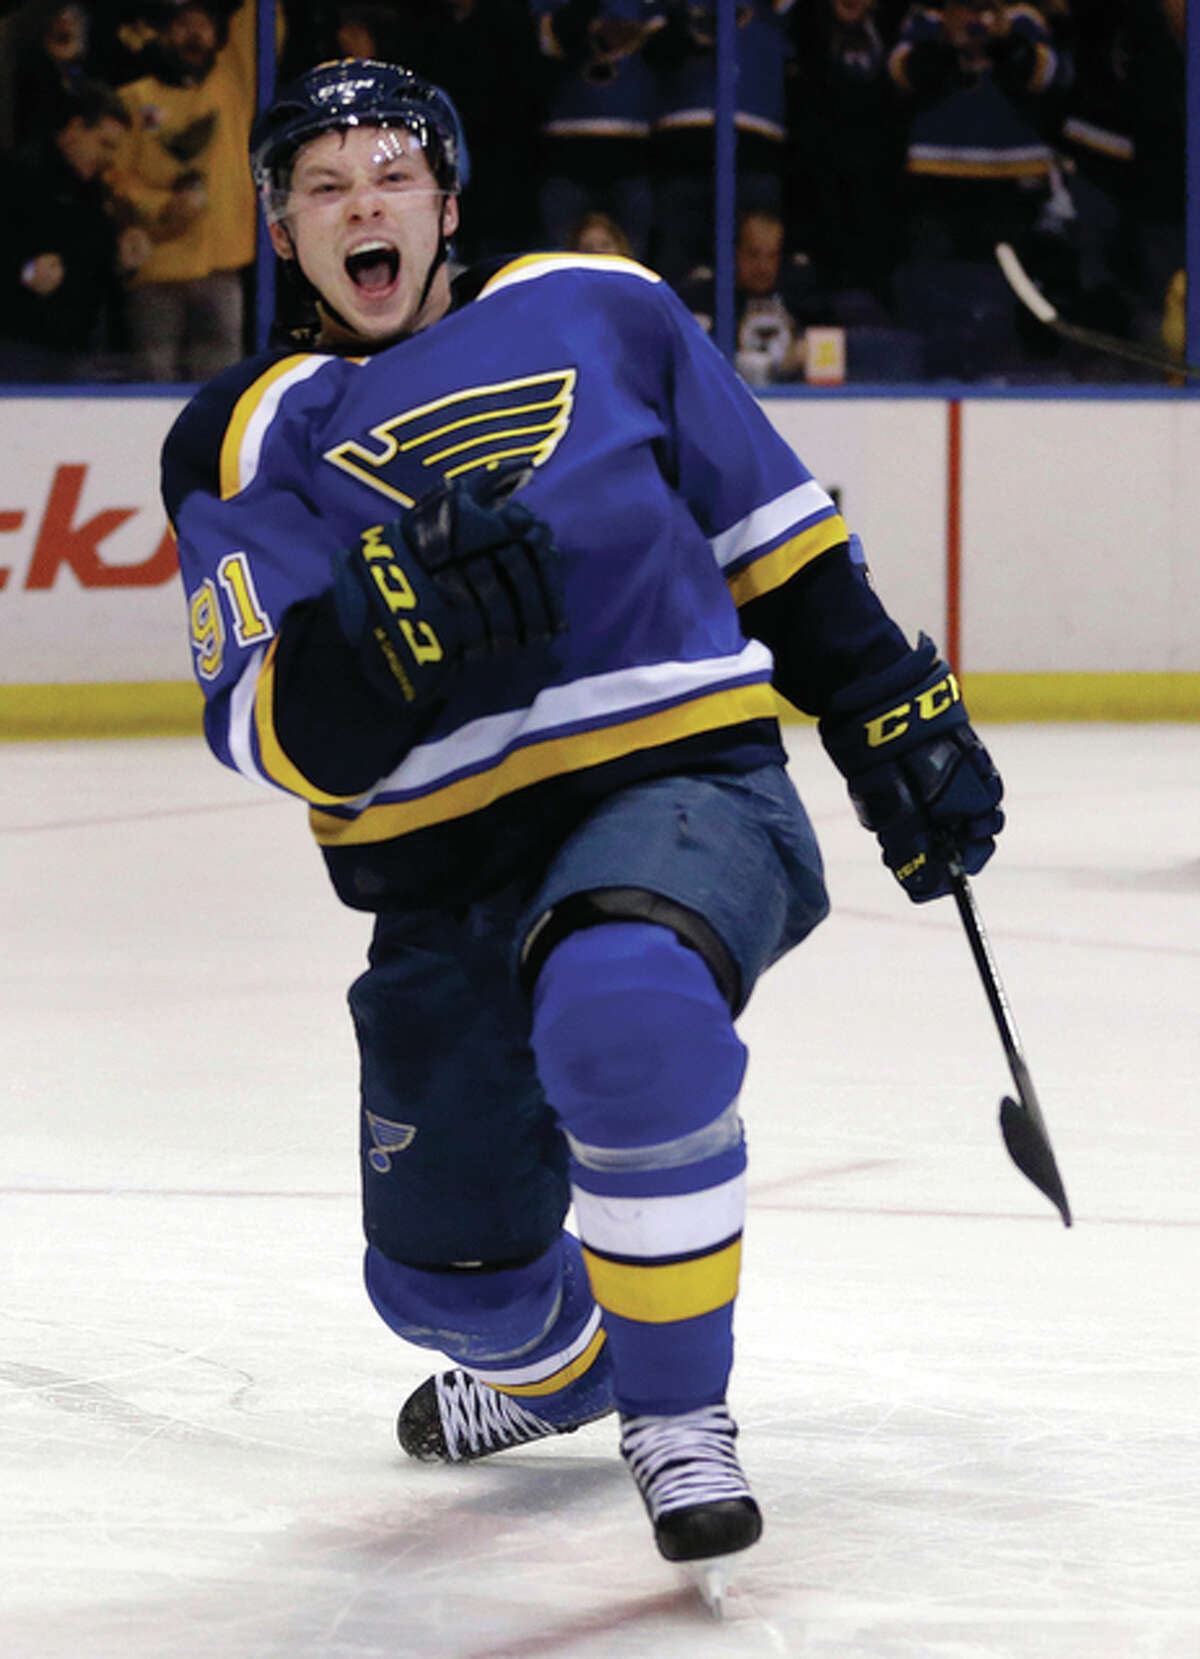 The Blues’ Vladimir Tarasenko reacts after scoring during the second period Monday night against the Pittsburgh Penguins in St. Louis.